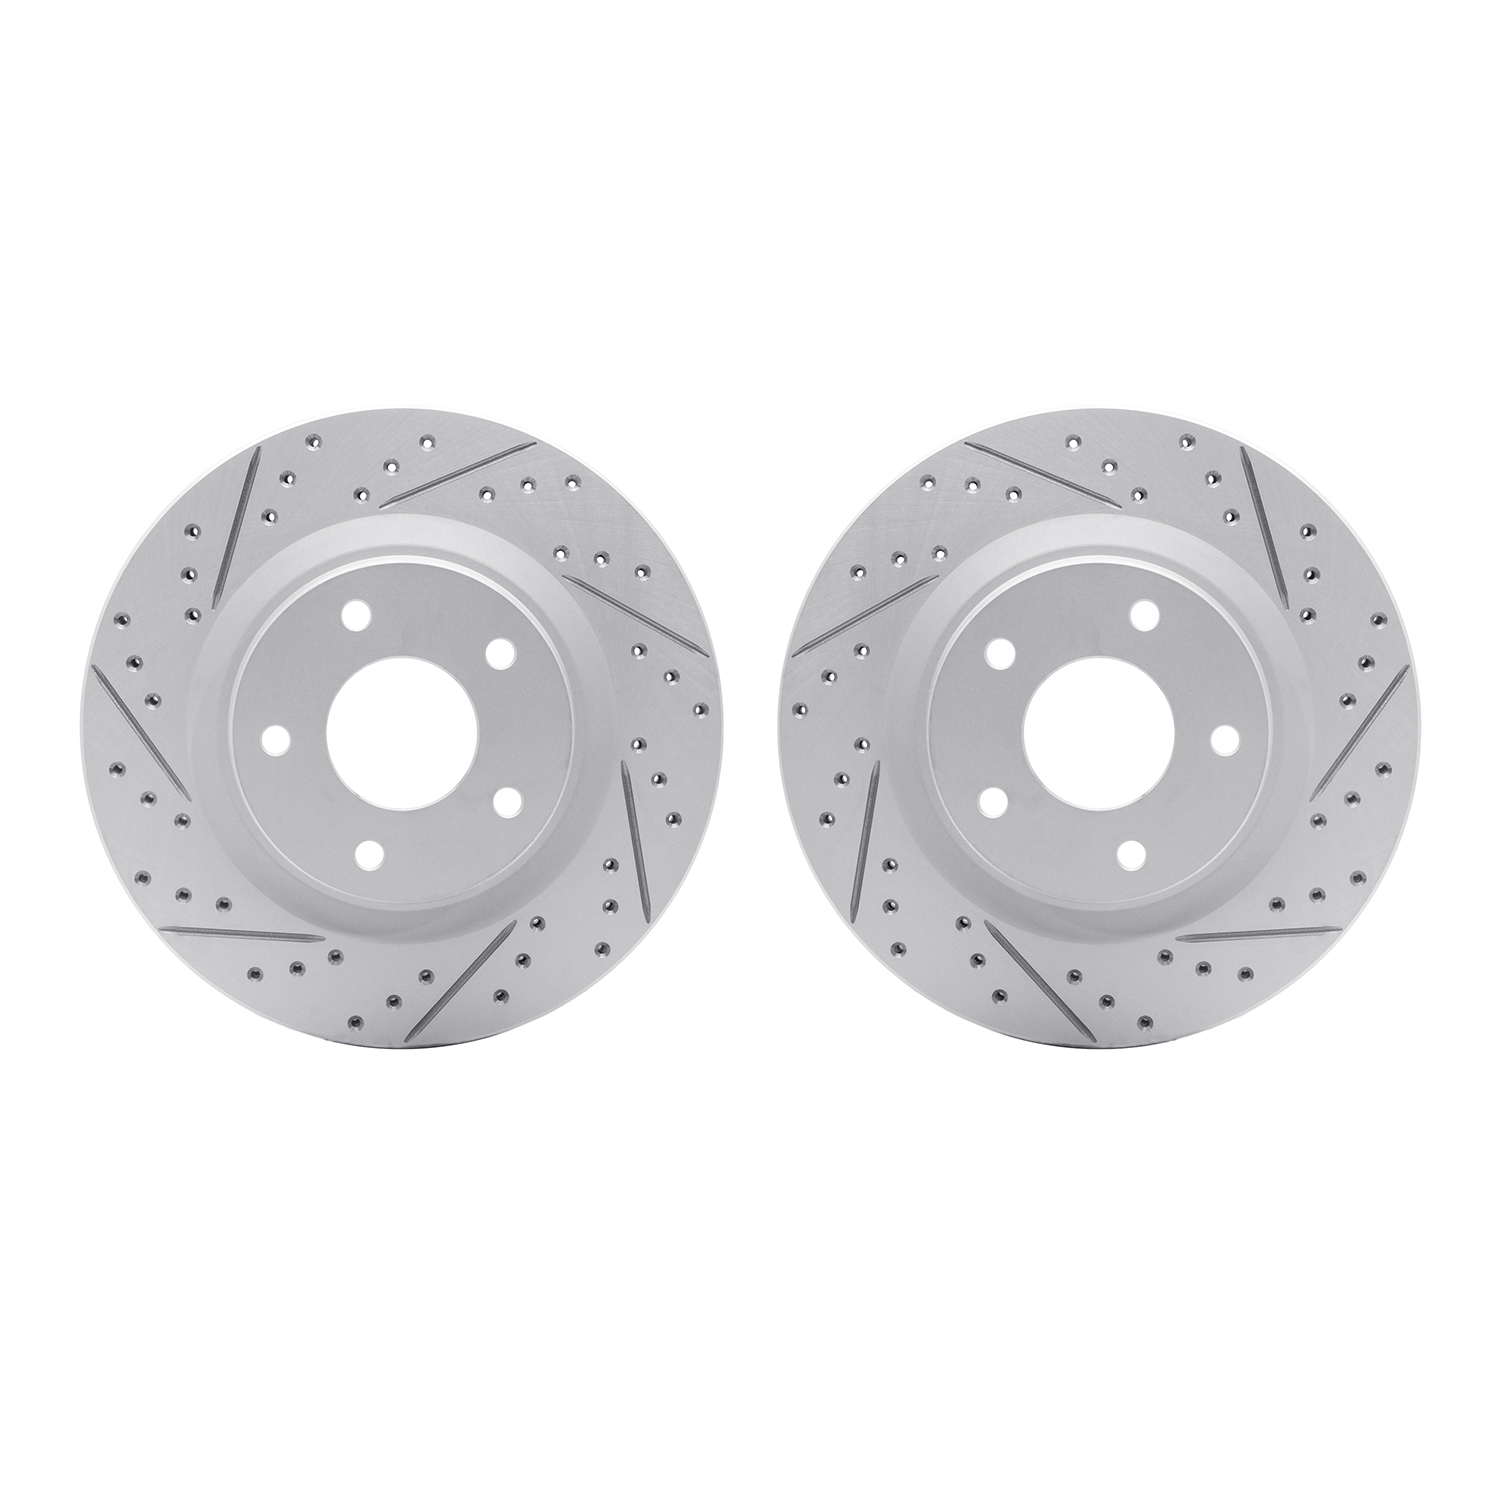 2002-67028 Geoperformance Drilled/Slotted Brake Rotors, 2011-2019 Infiniti/Nissan, Position: Front